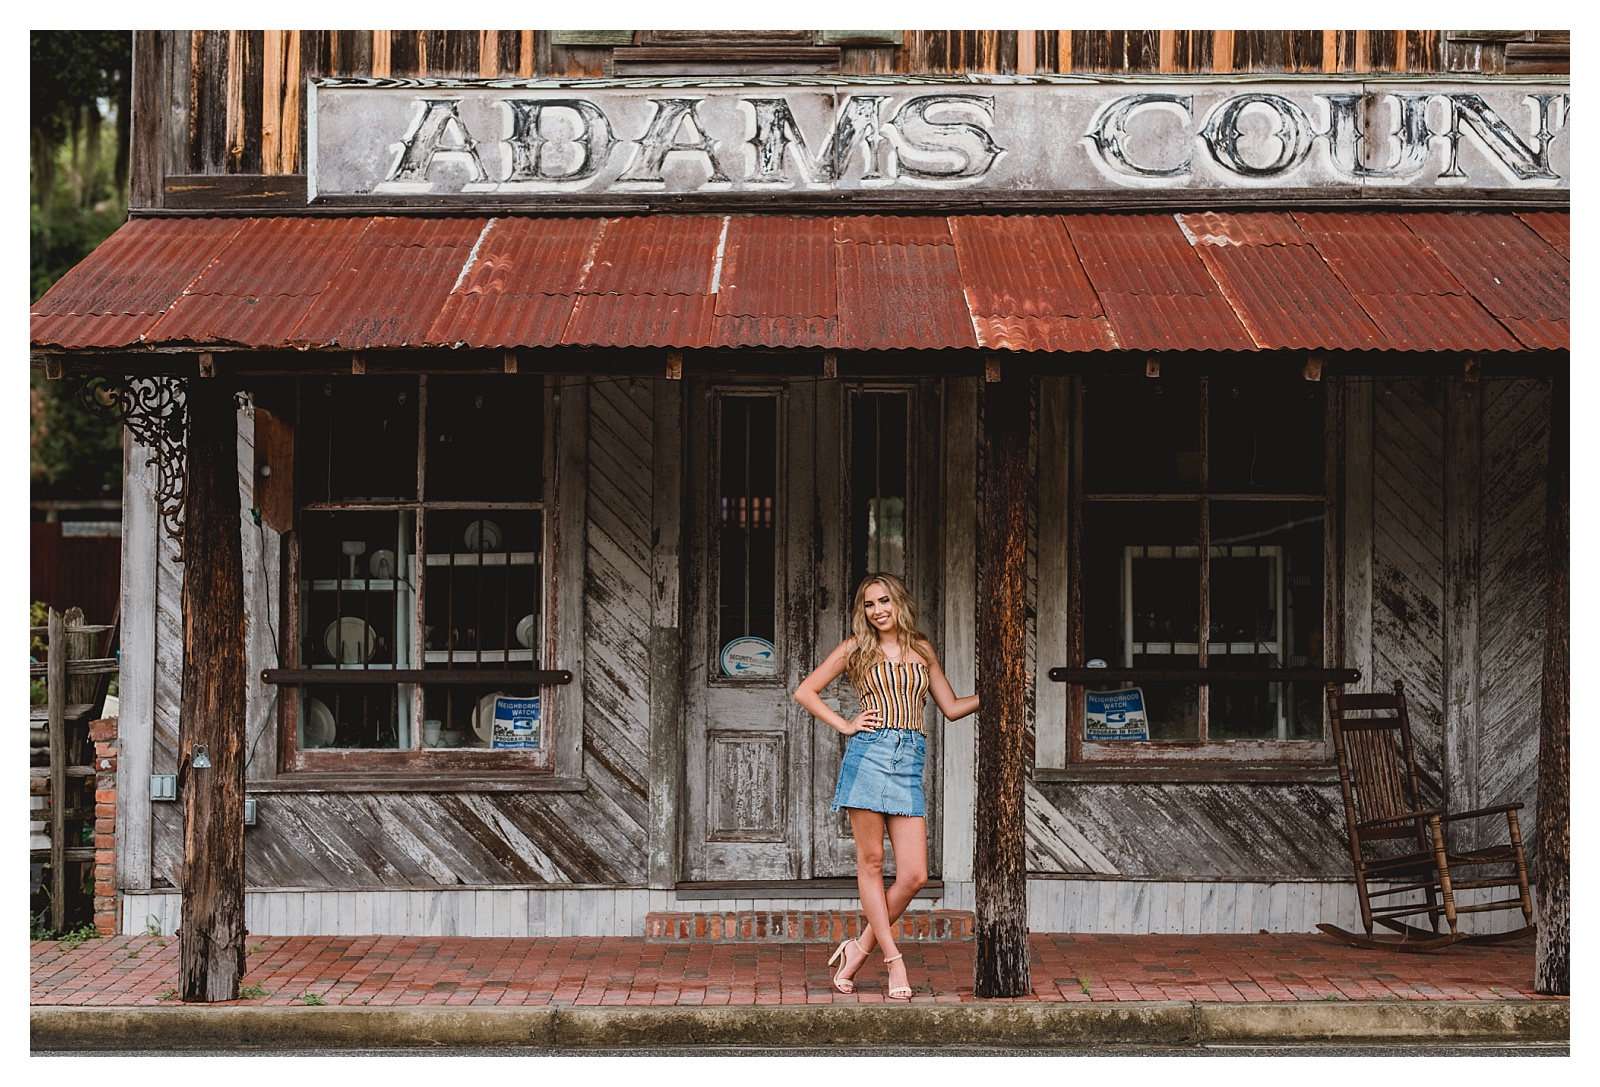 North Florida senior vintage photography by Shelly Williams.